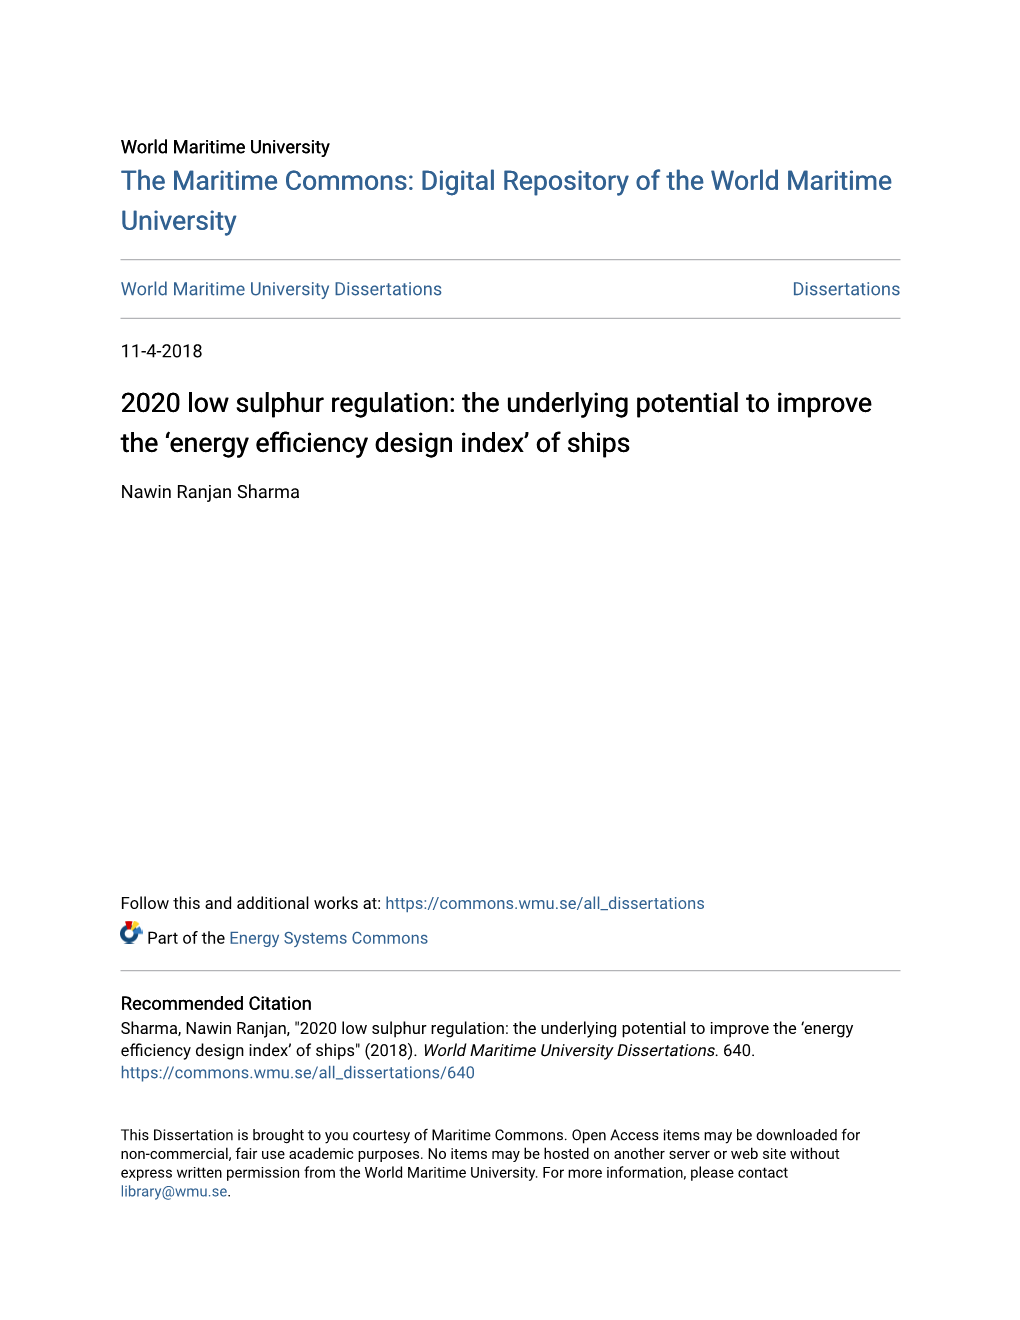 2020 Low Sulphur Regulation: the Underlying Potential to Improve the ‘Energy Efficiency Design Index’ of Ships